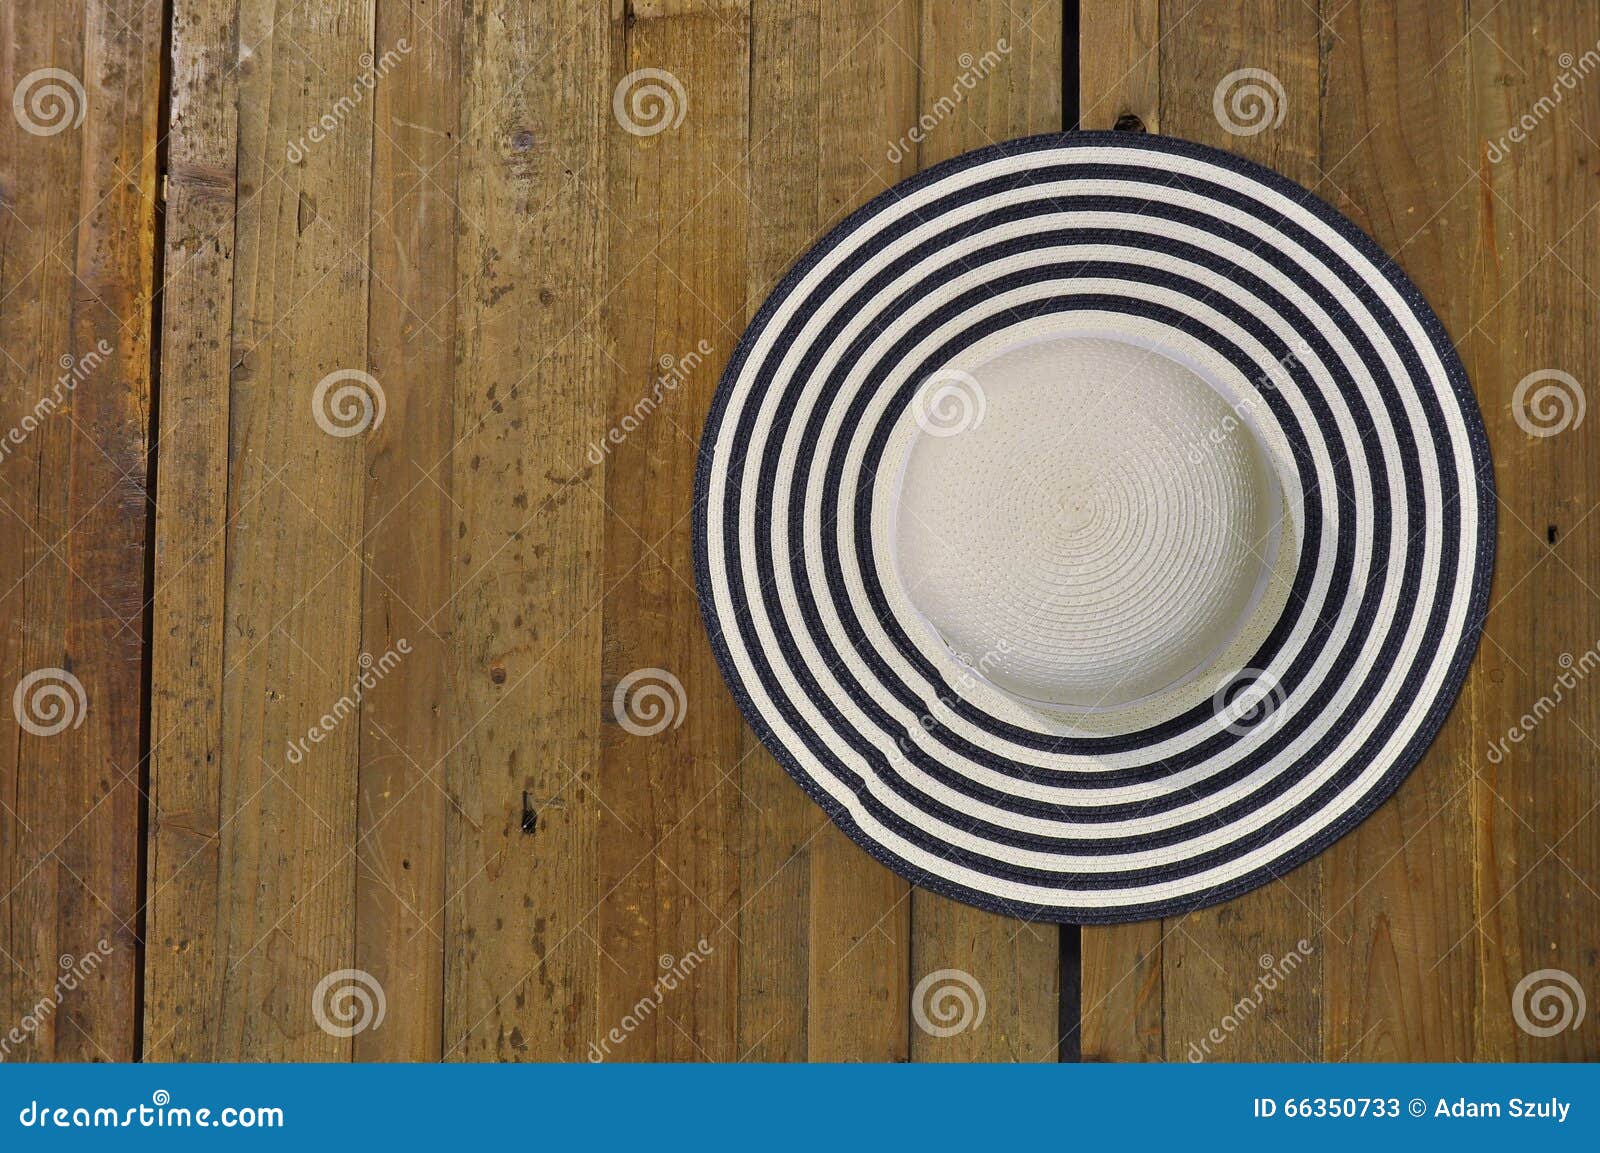 Straw hat on a table stock image. Image of wood, background - 66350733